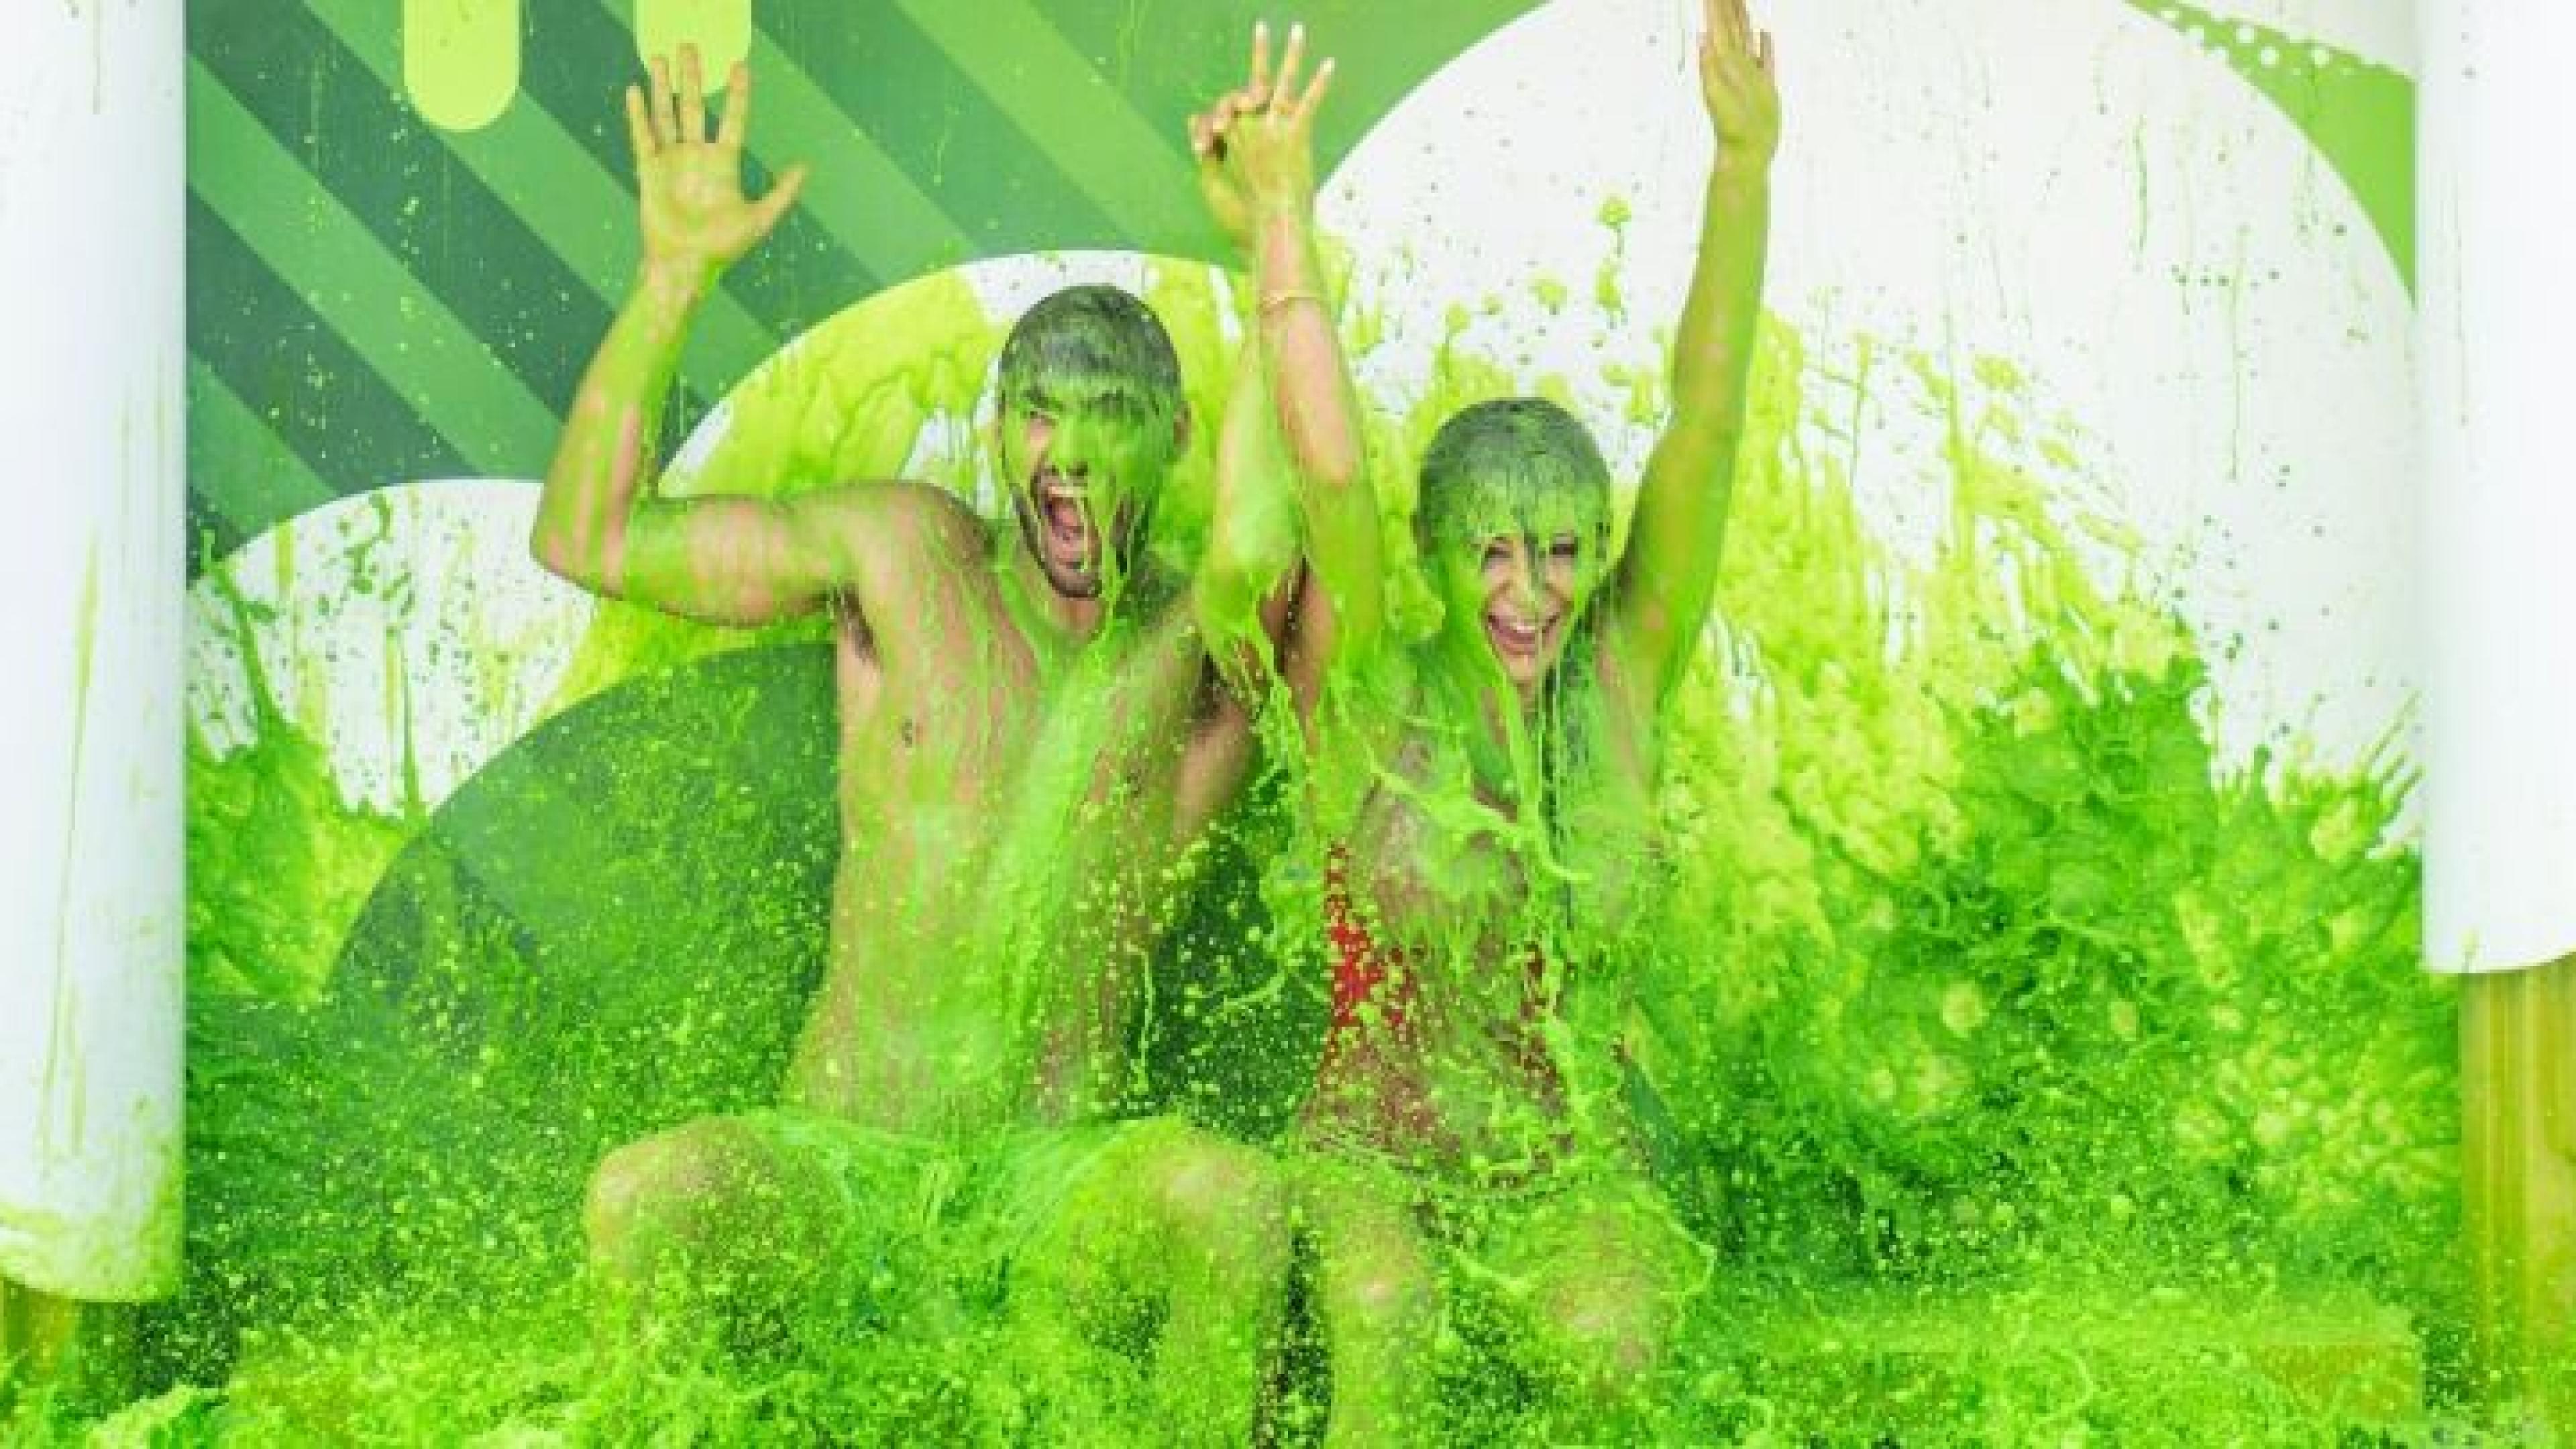 A couple getting covered in green slime